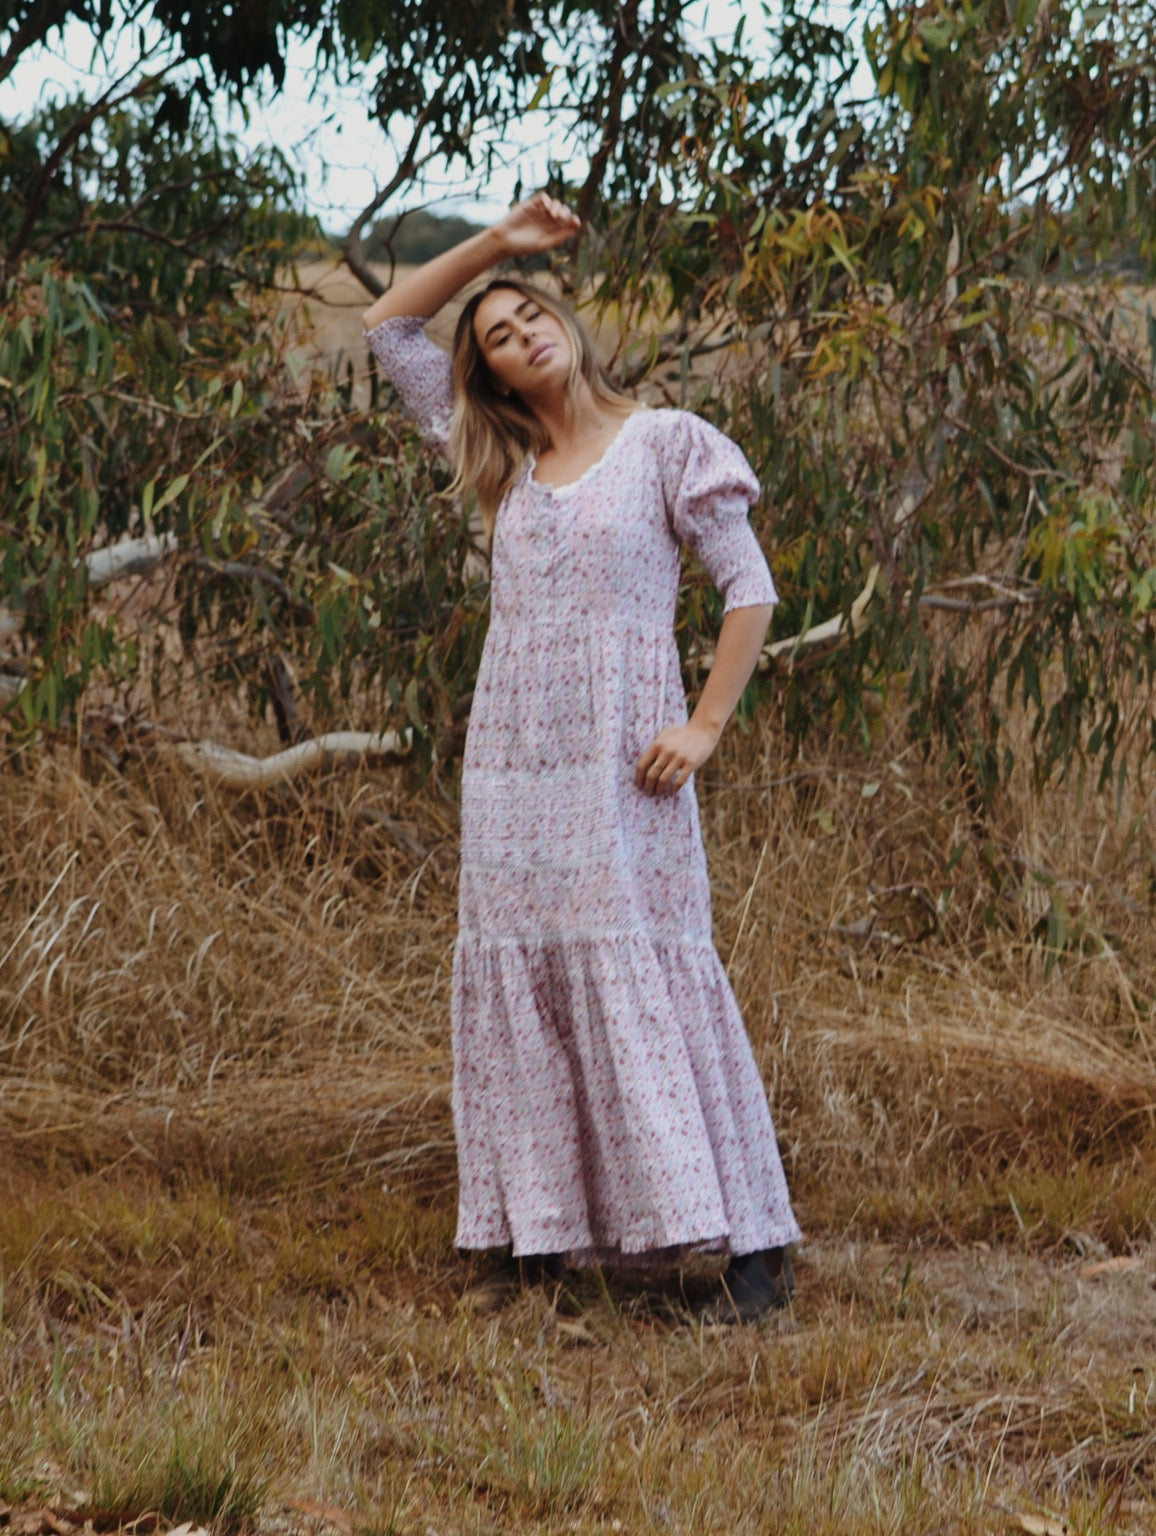 AUGUSTINE MAXI DRESS PINK DITSY FLORAL